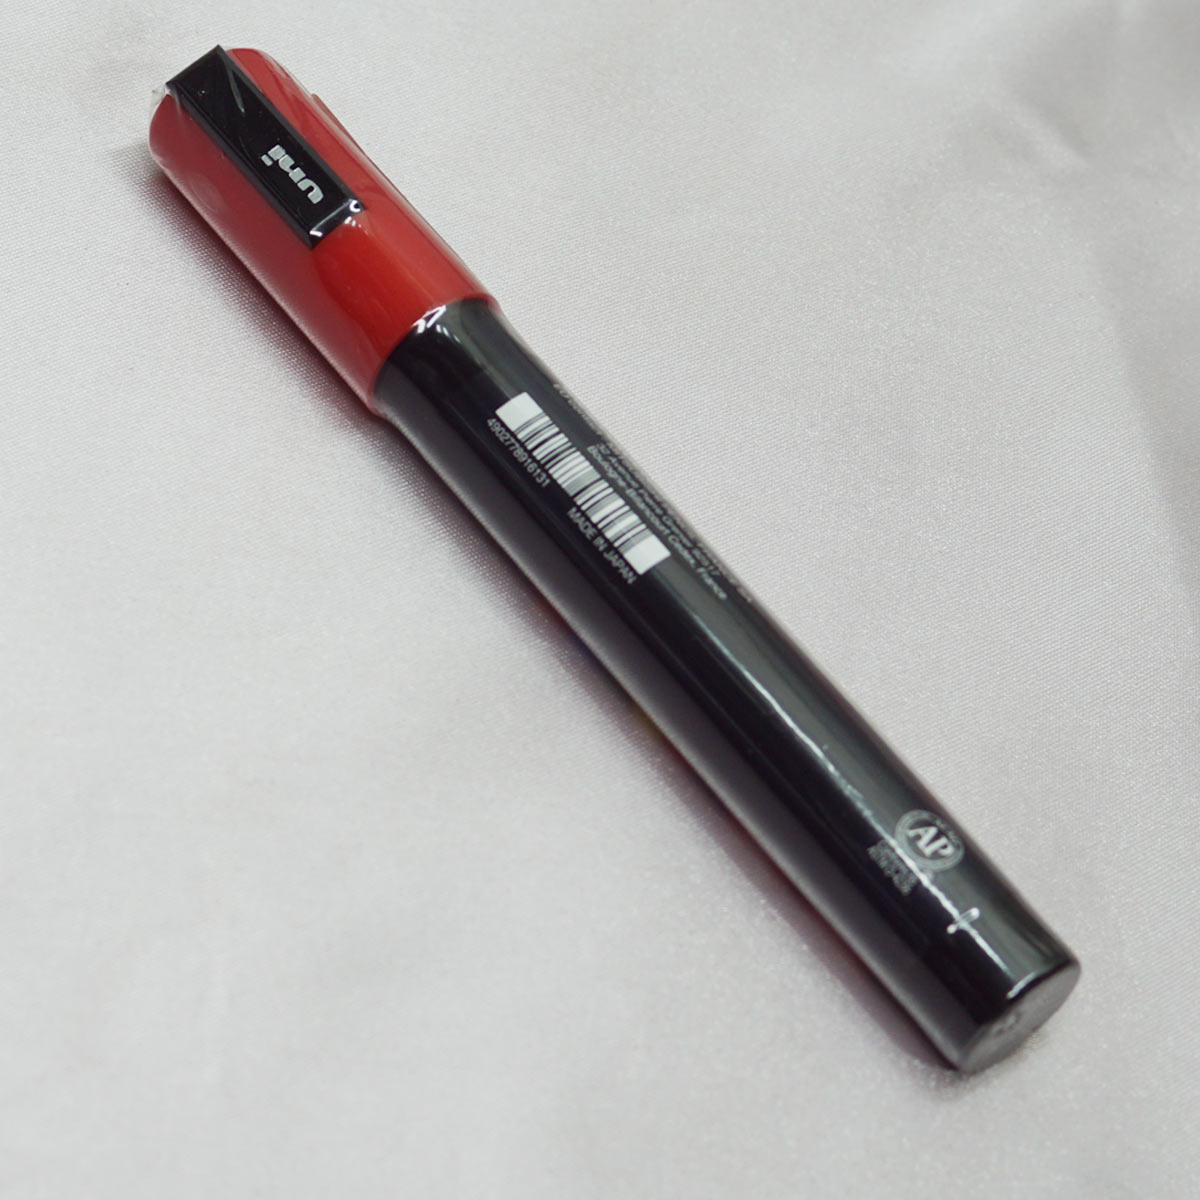 Uniball Posca PC-5M Bullet Medium Tip 1.8 - 2.5mm Opaque Red Color and Water Based Paint Marker SKU 22474